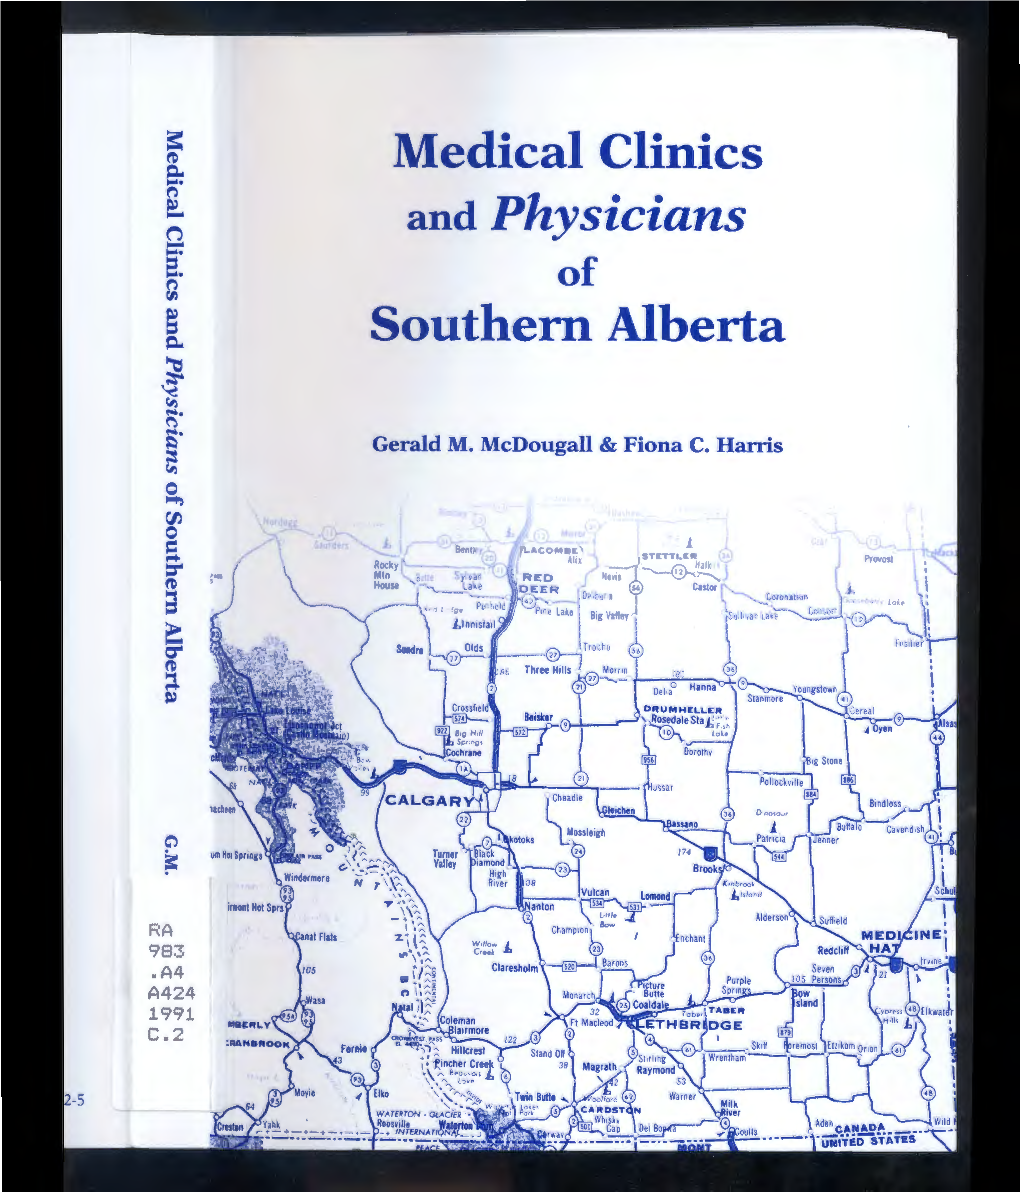 And Physicians of Southern Alberta